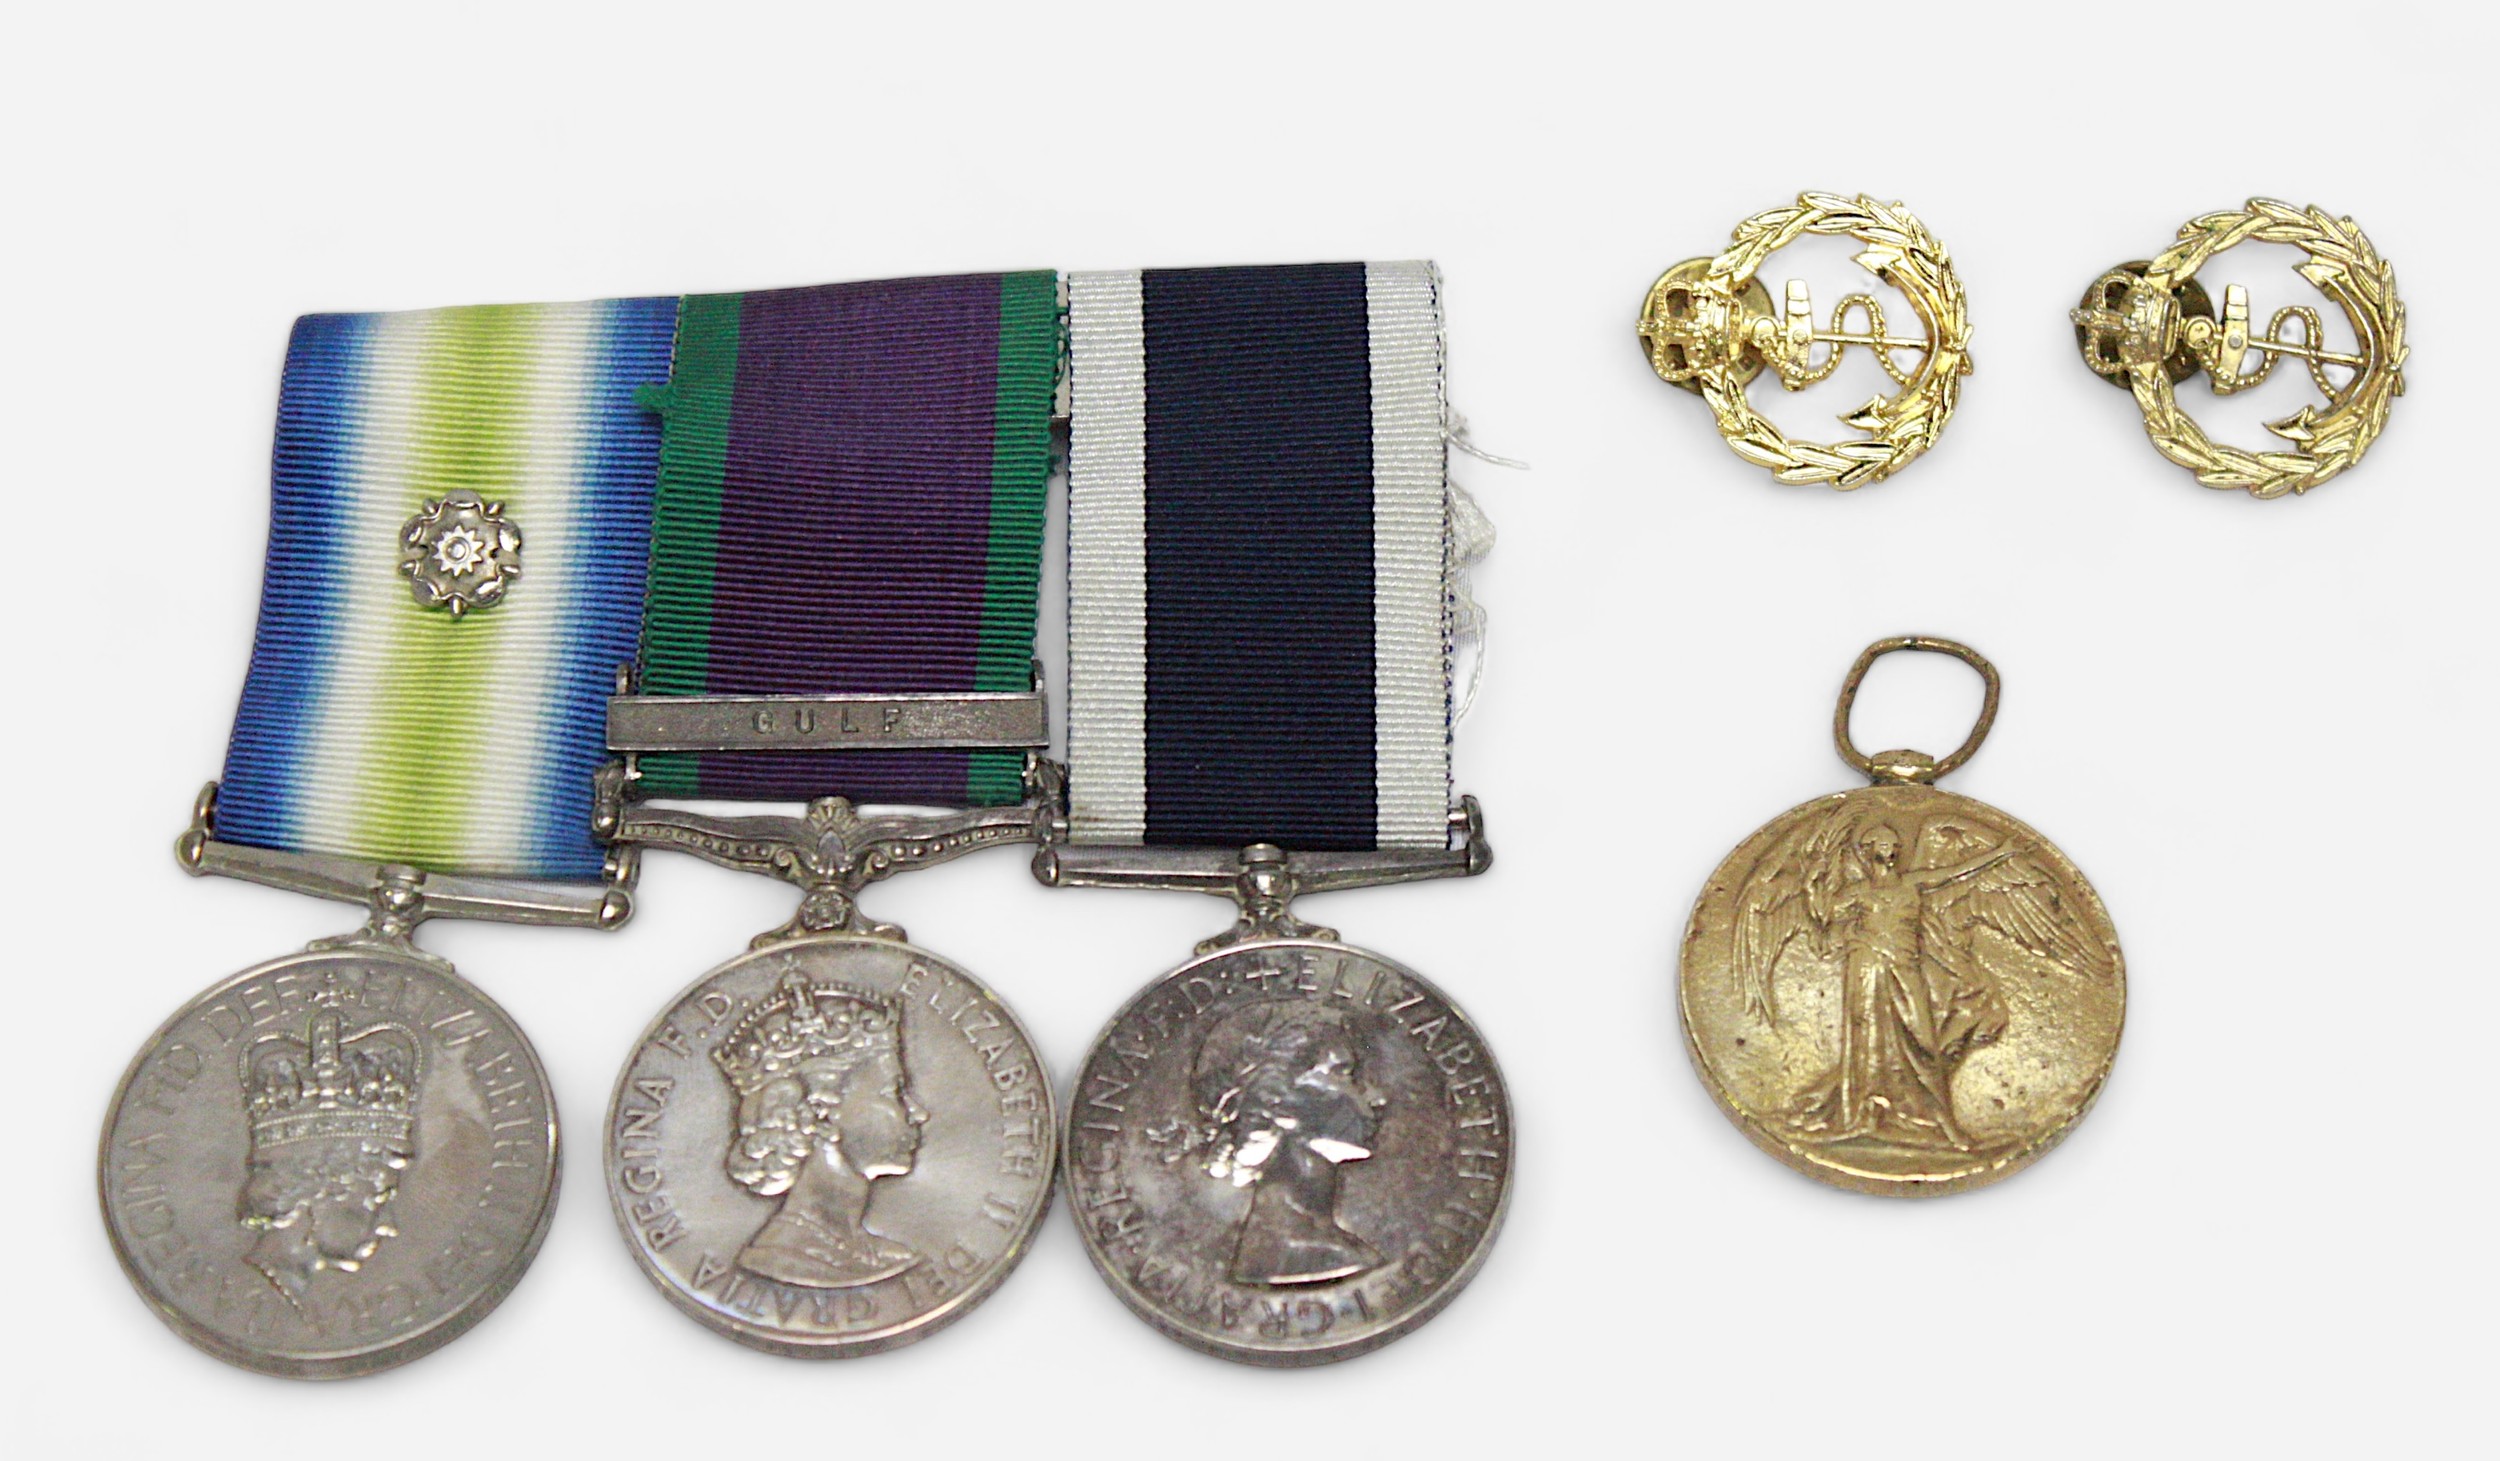 An ERII South Atlantic Medal with Rosette to 'ALS (EW) W.A. PEACOCK D157286B HMS ANDROMEDA, with